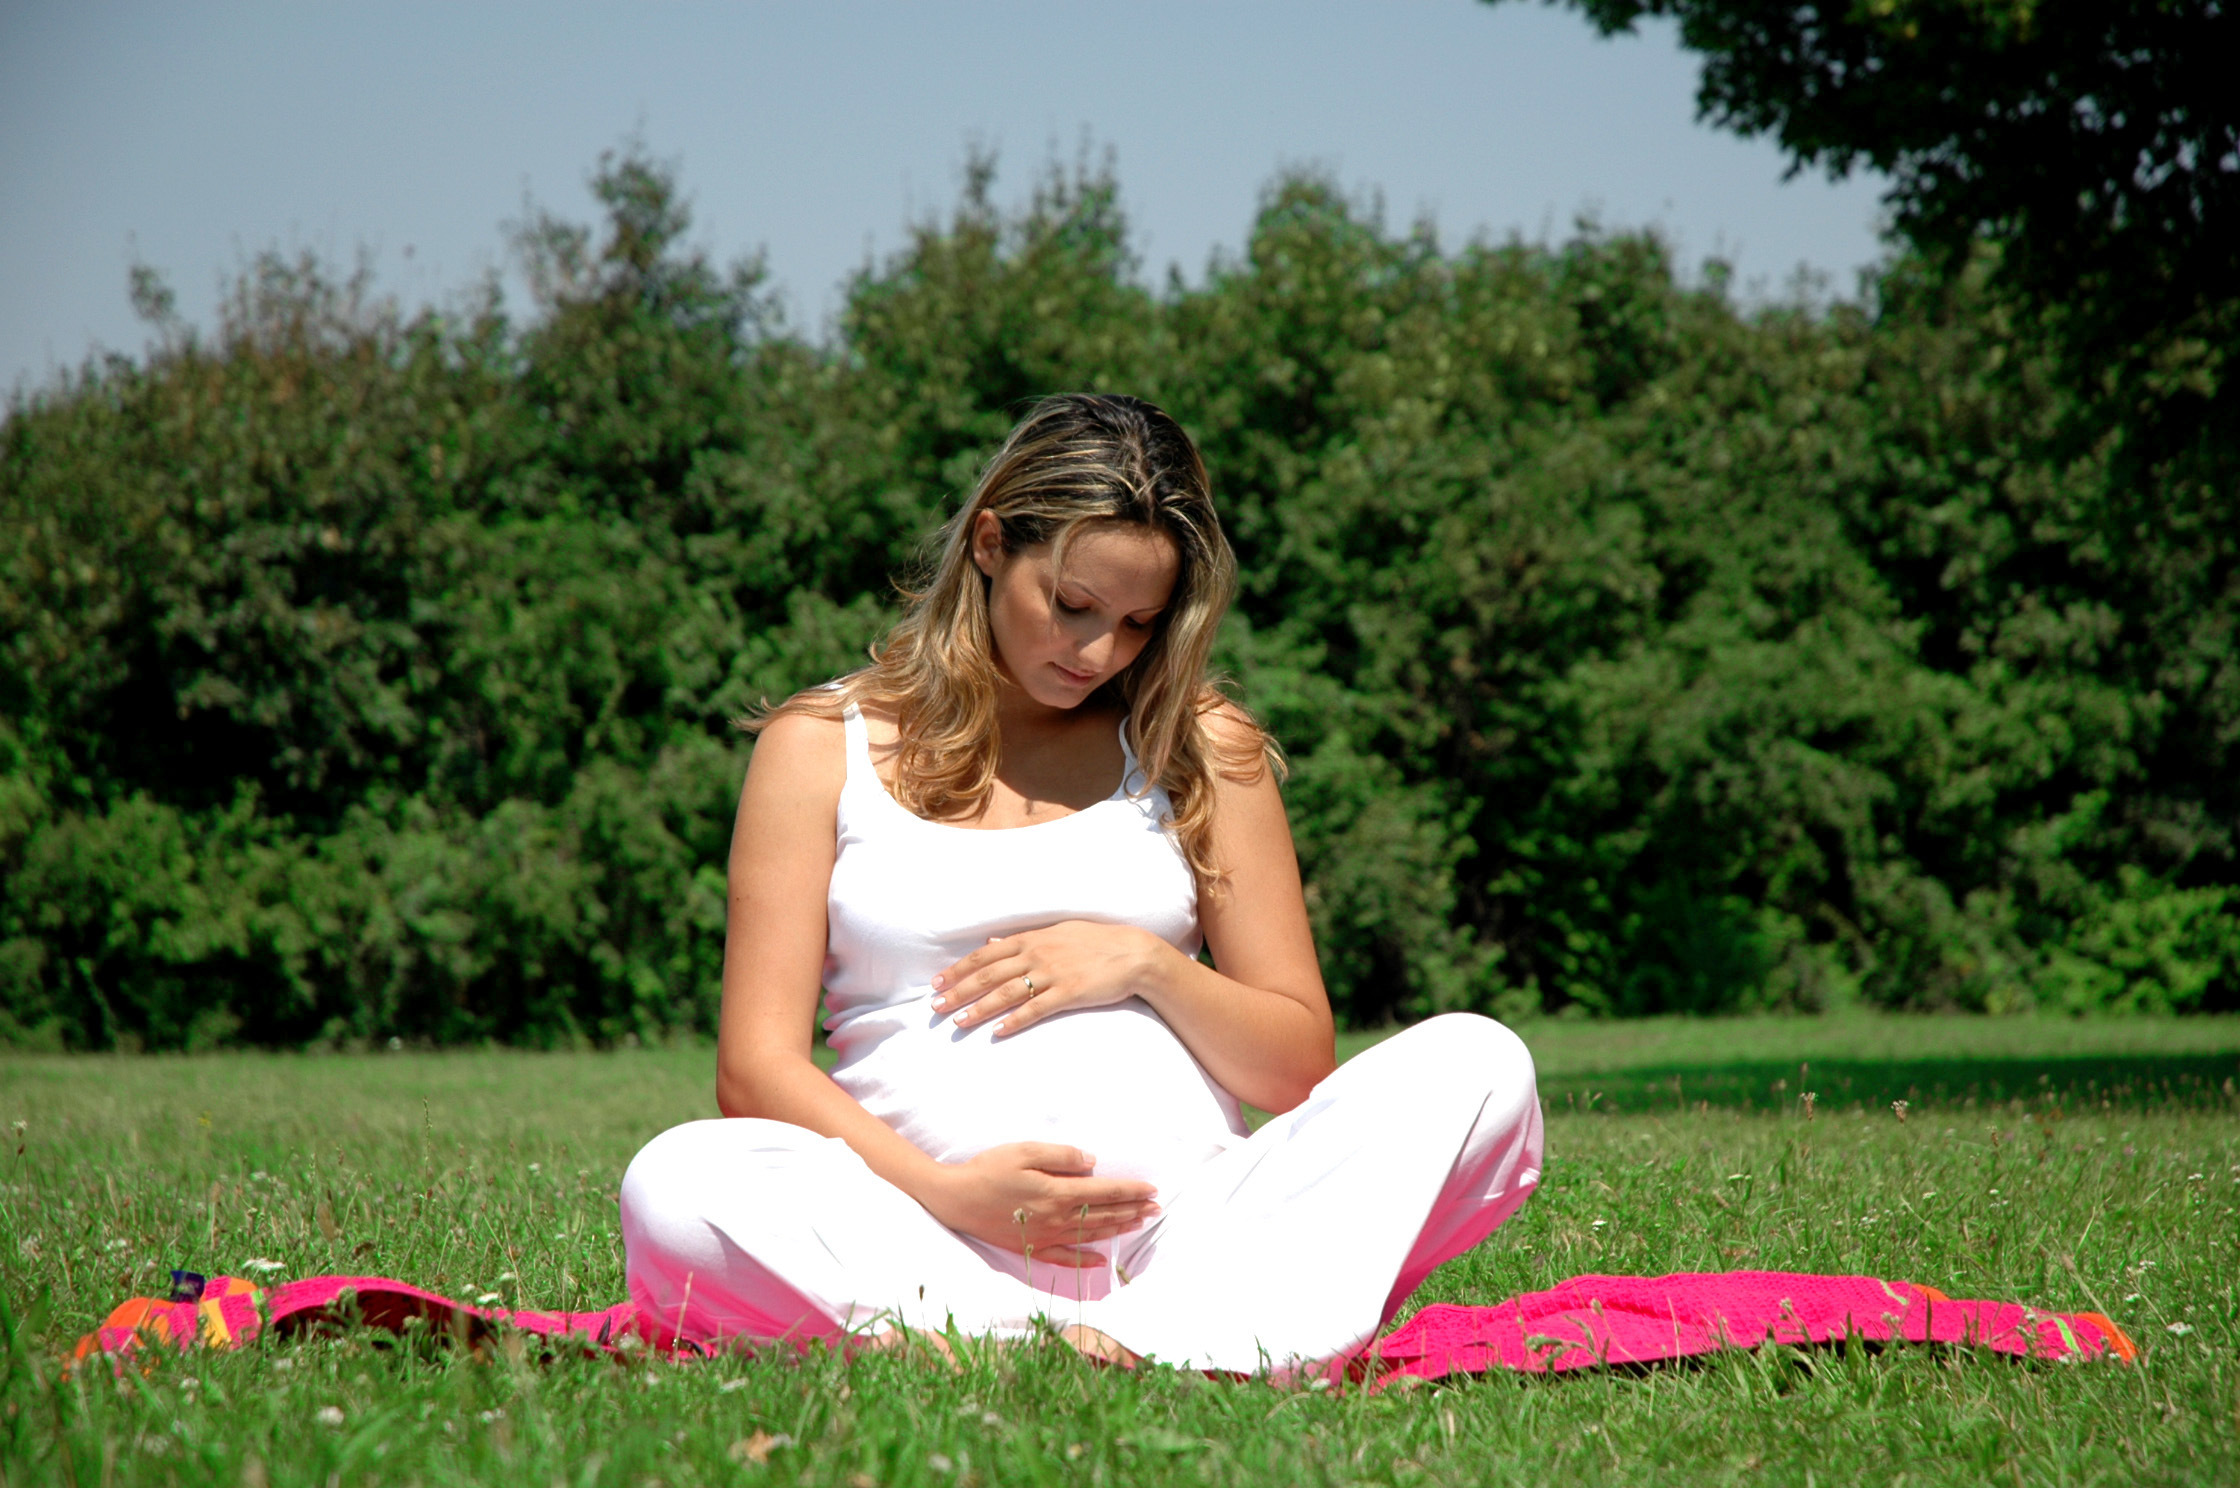 Products to Deeply Relax You During Pregnancy